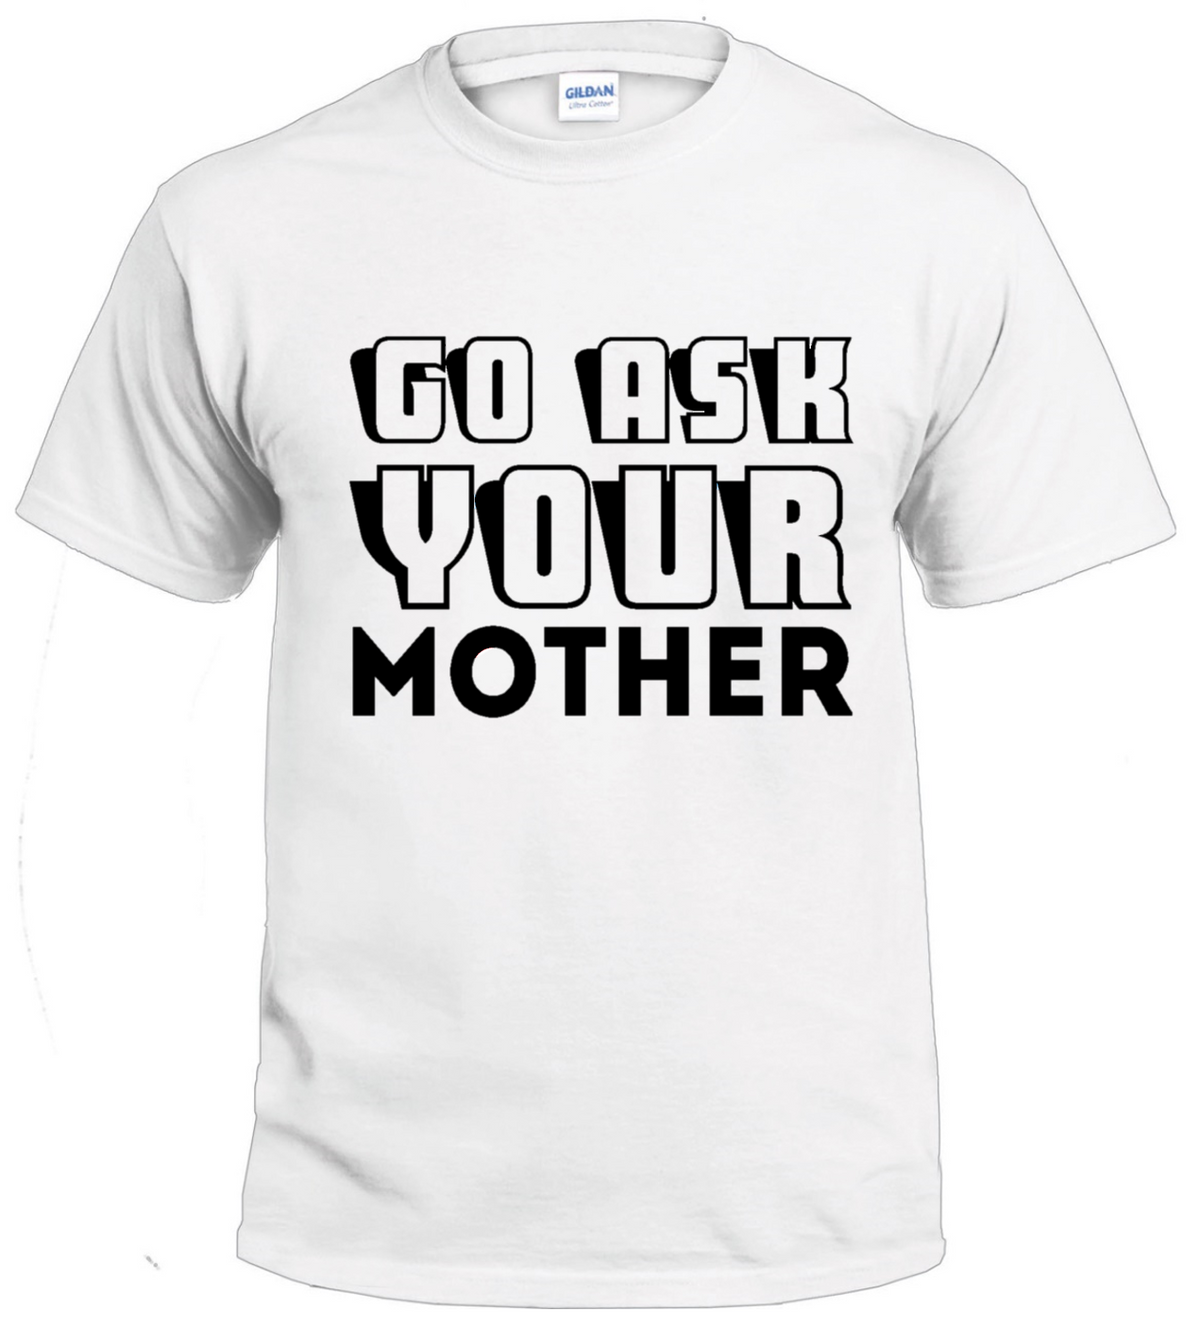 Go Ask Your Mother t-shirt